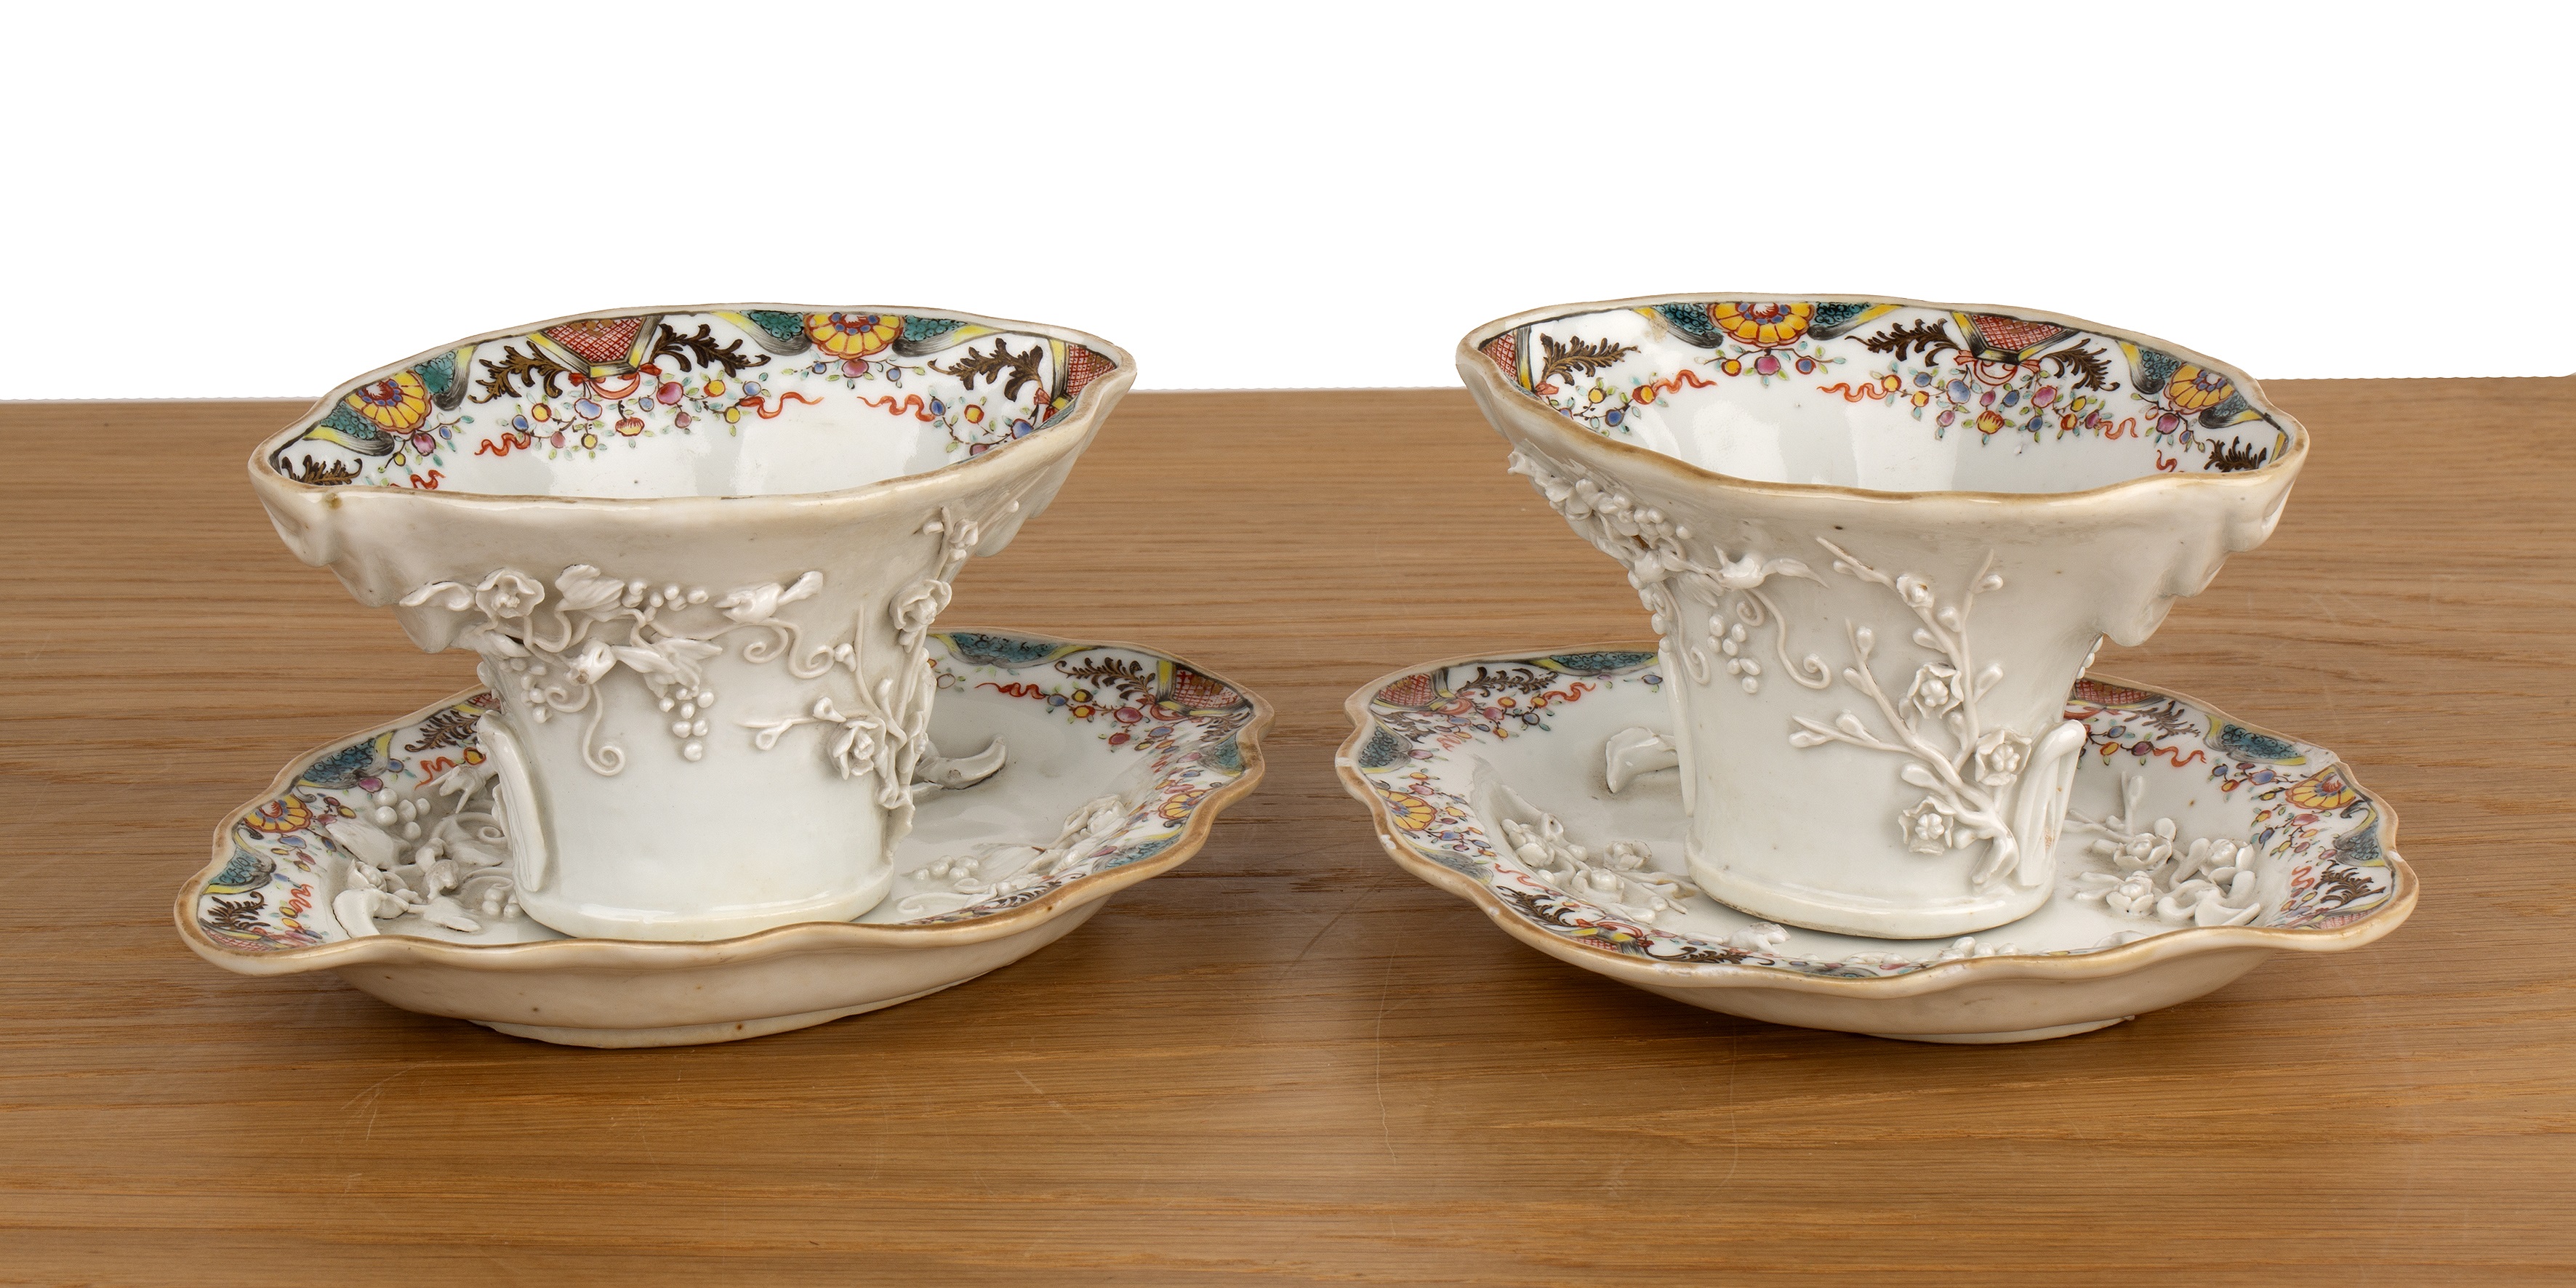 Pair of export porcelain libation cups and stands Chinese, 18th Century of white ground with